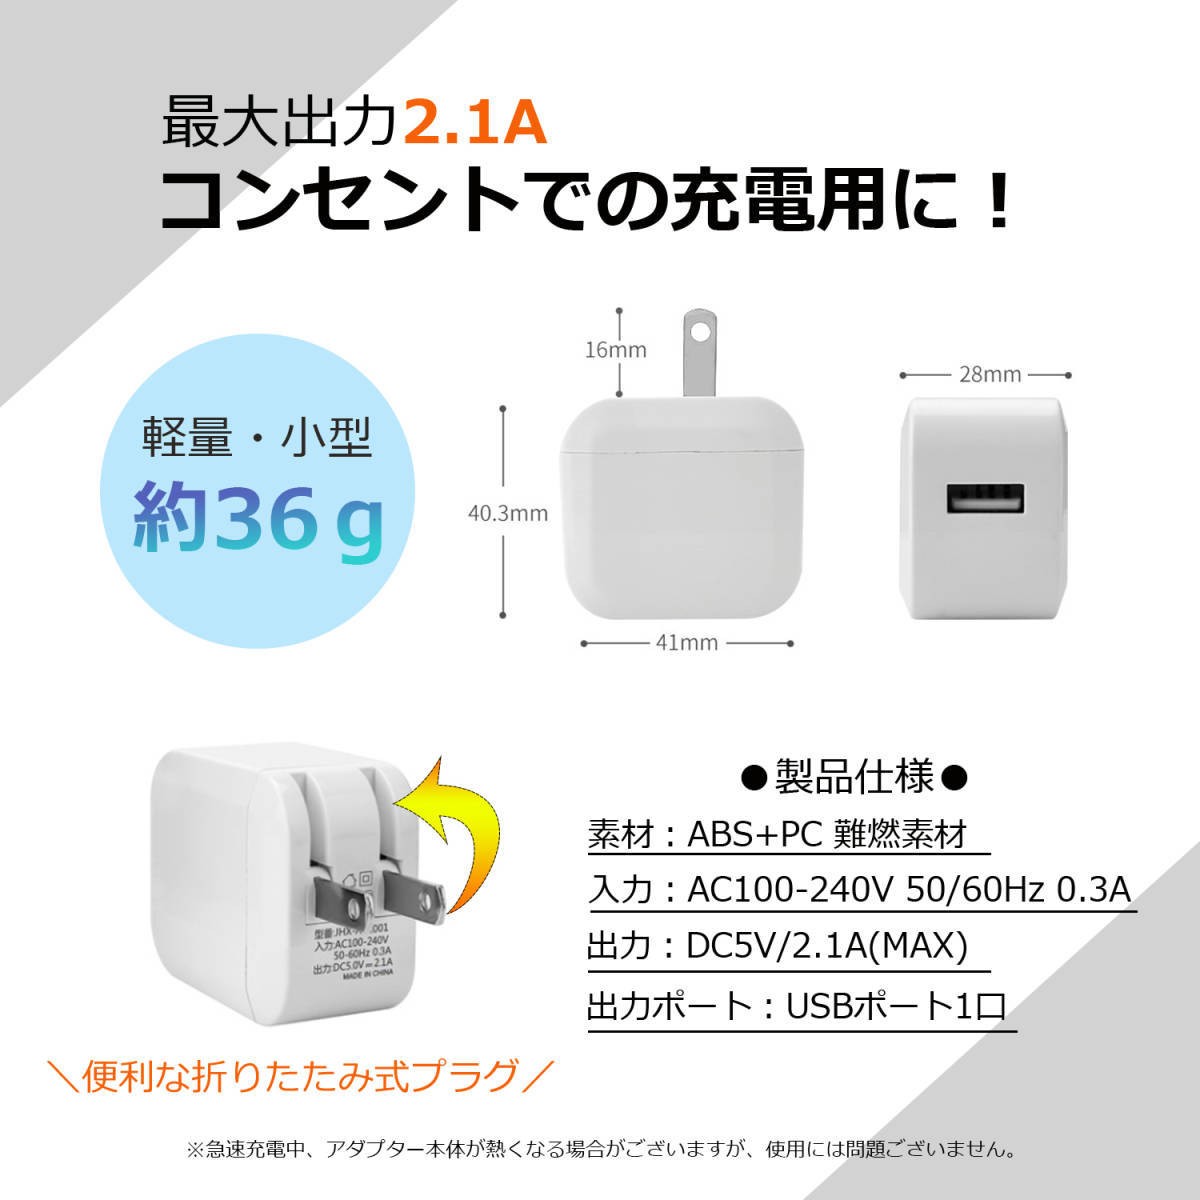 SONY NP-FV100　NP-FV100a 互換バッテリーと充電器 2.1A高速ACダプター付　FDR-AX60 FDR-AX45 FDR-AX700 FDR-AX55 FDR-AX45 FDR-AX30_画像5